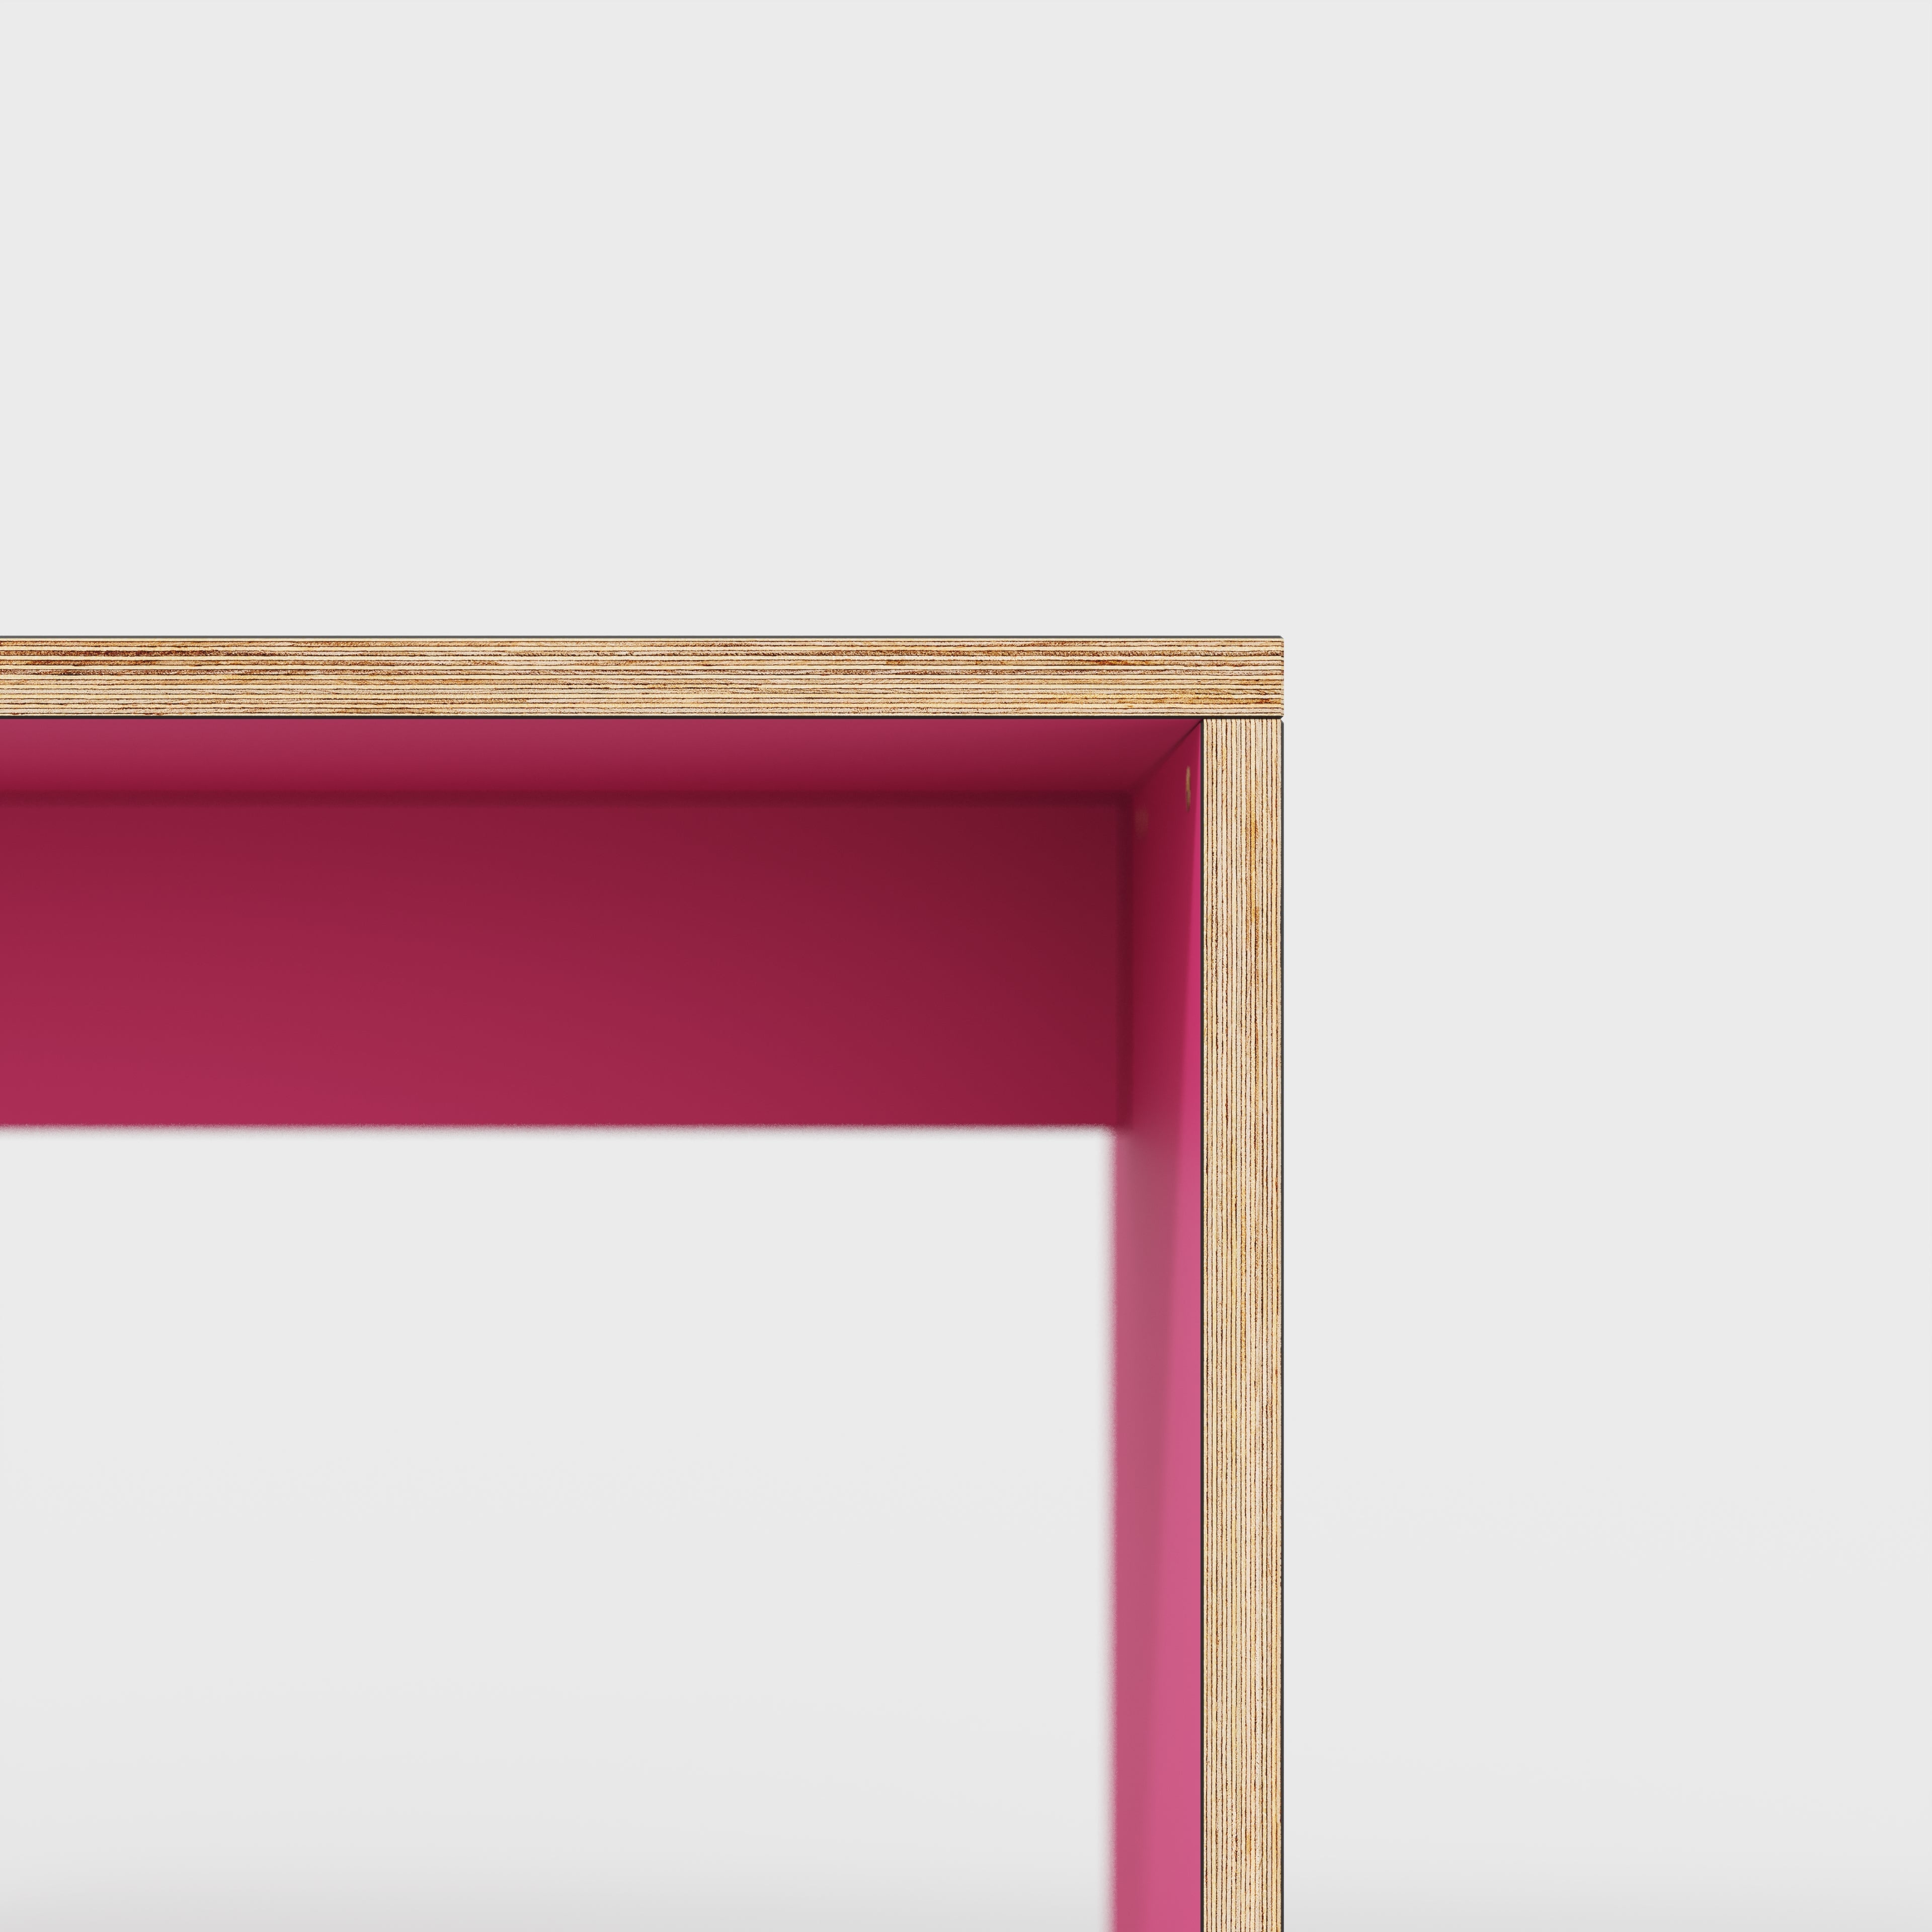 Desk with Solid Sides - Formica Juicy Pink - 1200(w) x 600(d) x 750(h)